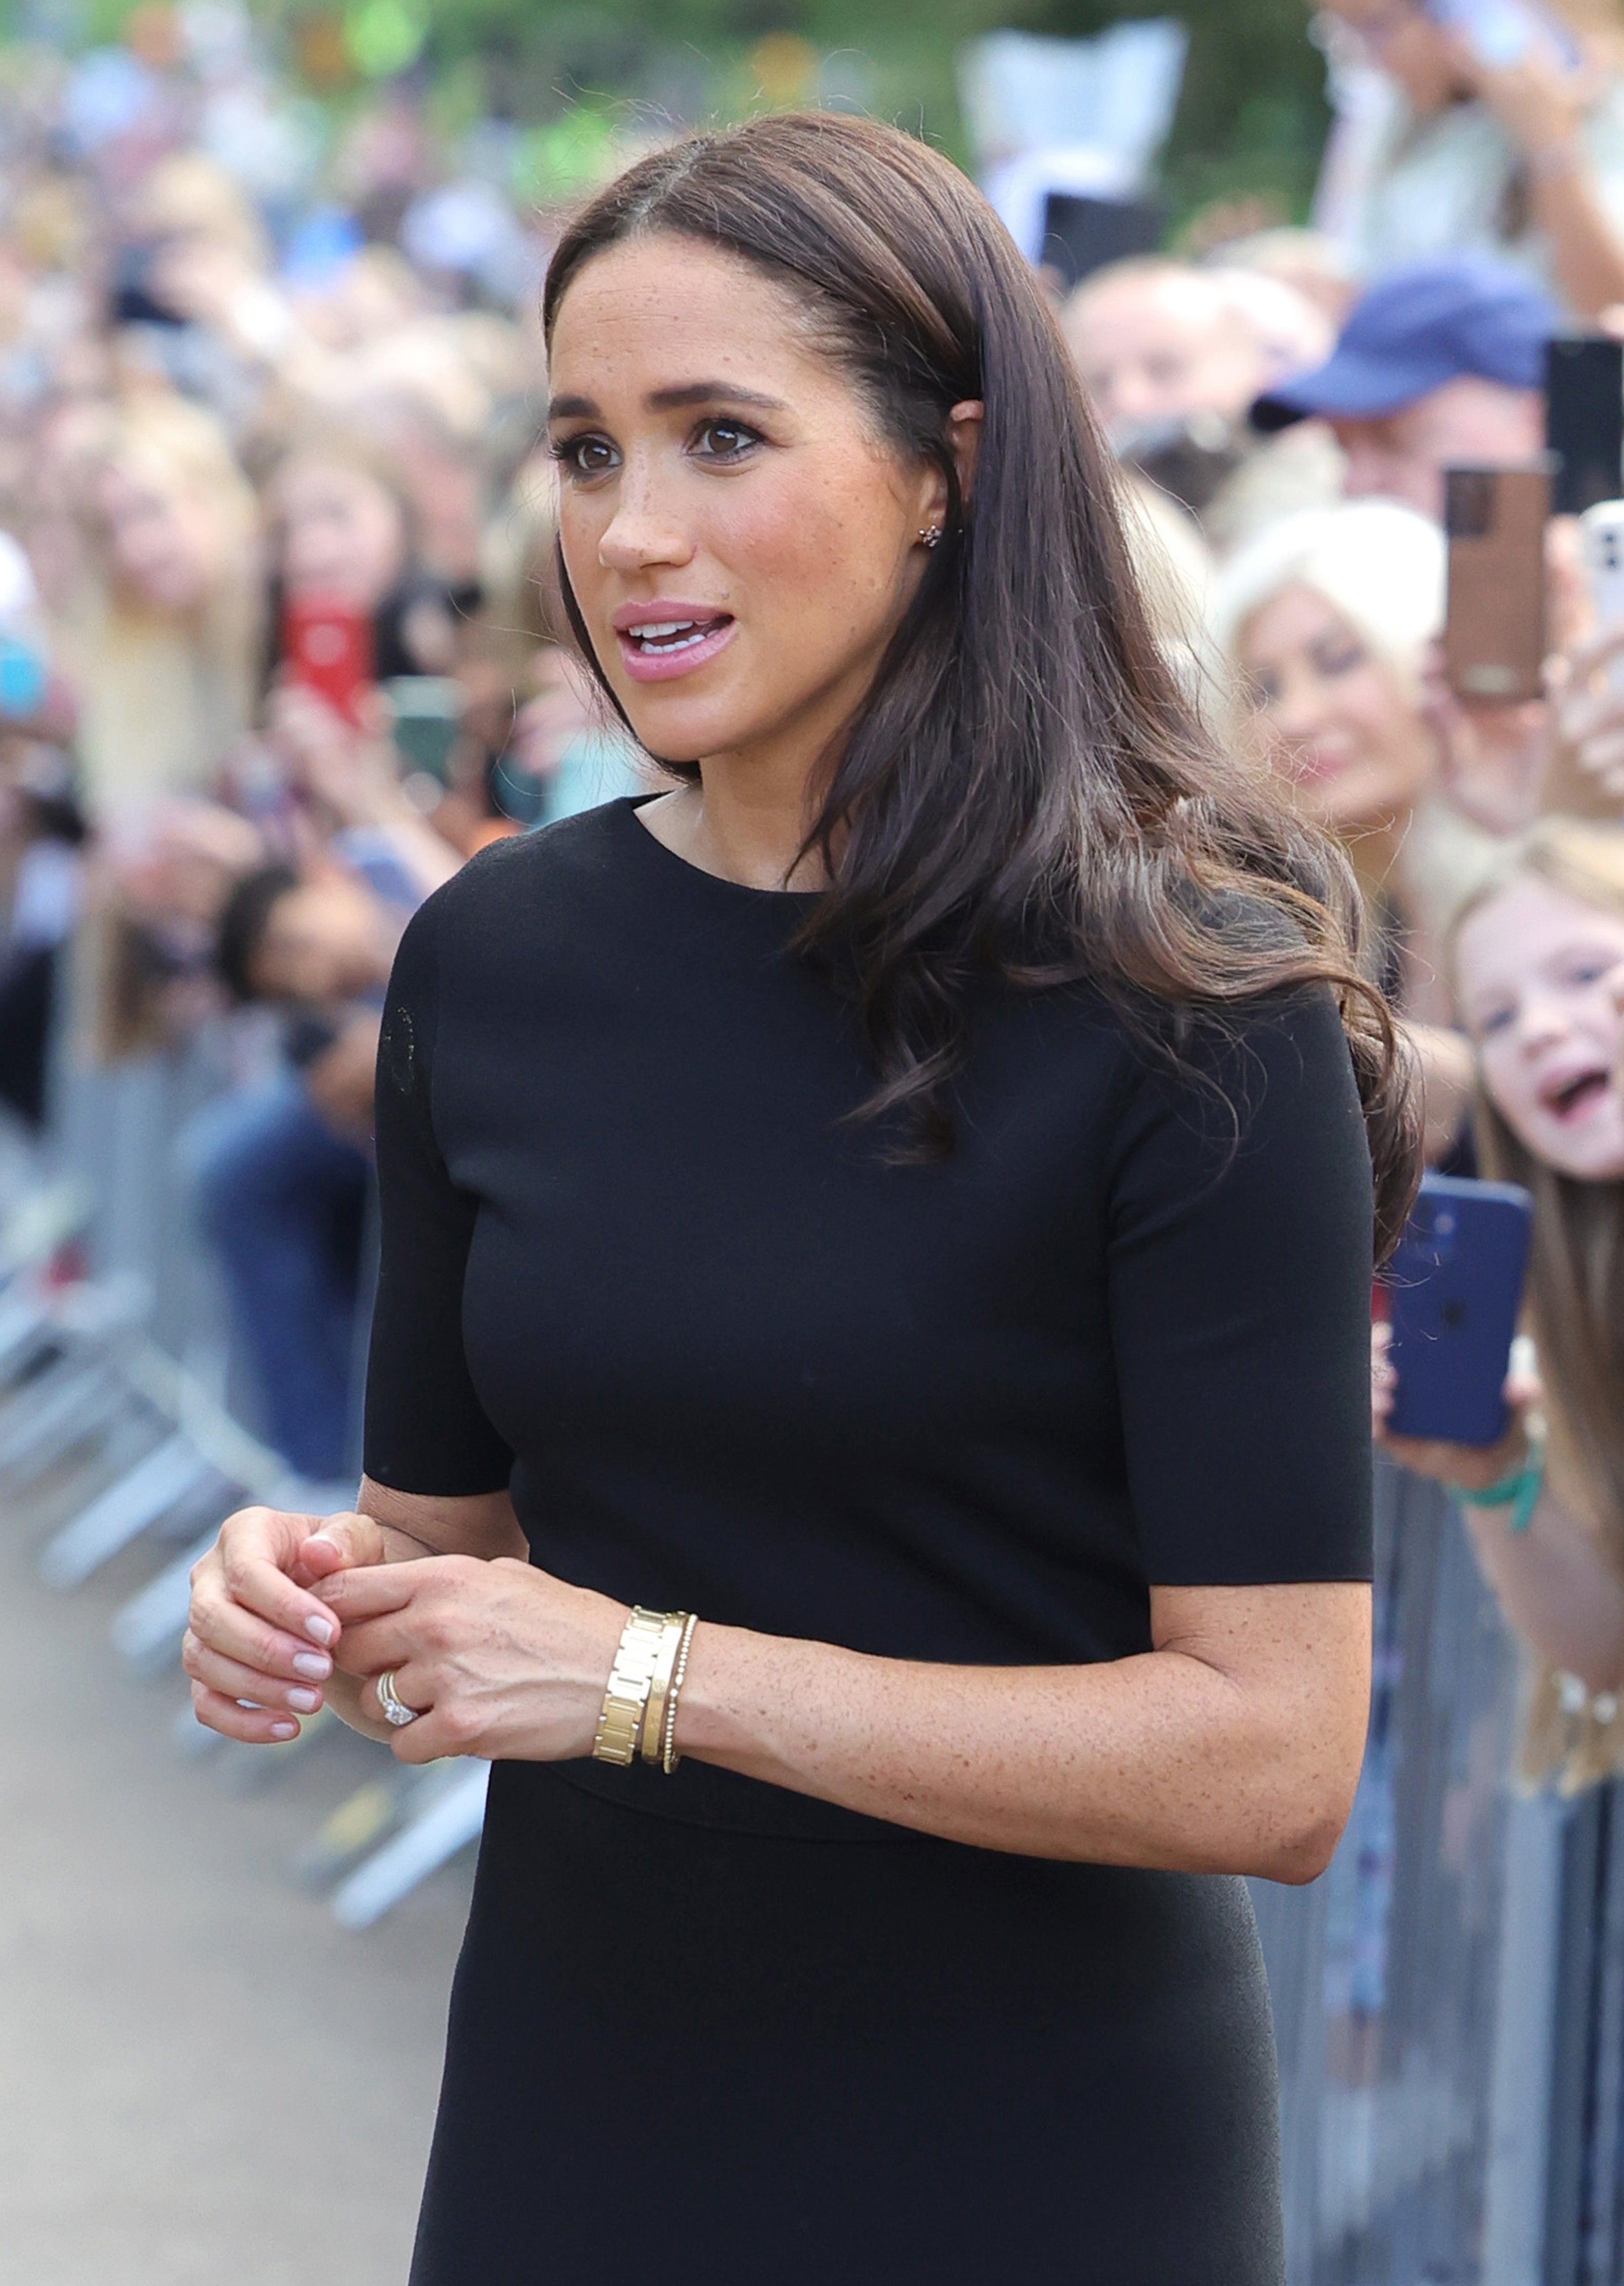 Duchess of Sussex’s Archetypes podcast to return as royal mourning period ends (Chris Jackson/PA)